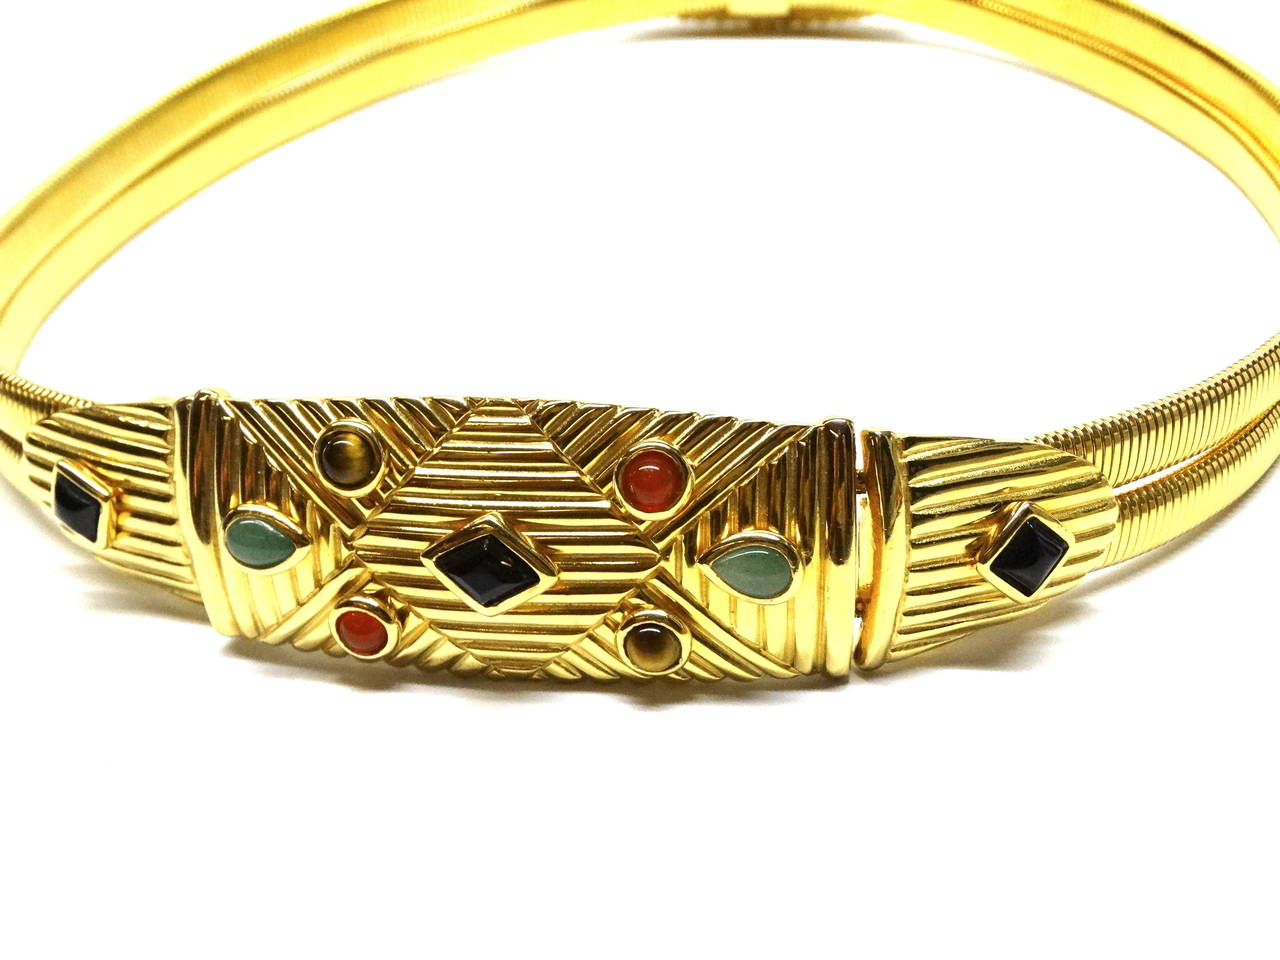 Judith Leiber gold gilt cord belt has semiprecious cabochon stones dating to the 1970's. This belt has Jade, Onyx, Tigers Eye on the front buckle plate with a  hook closure. On the back plate it has onyx cabochons Signed Judith Leiber… Fits a 25-26